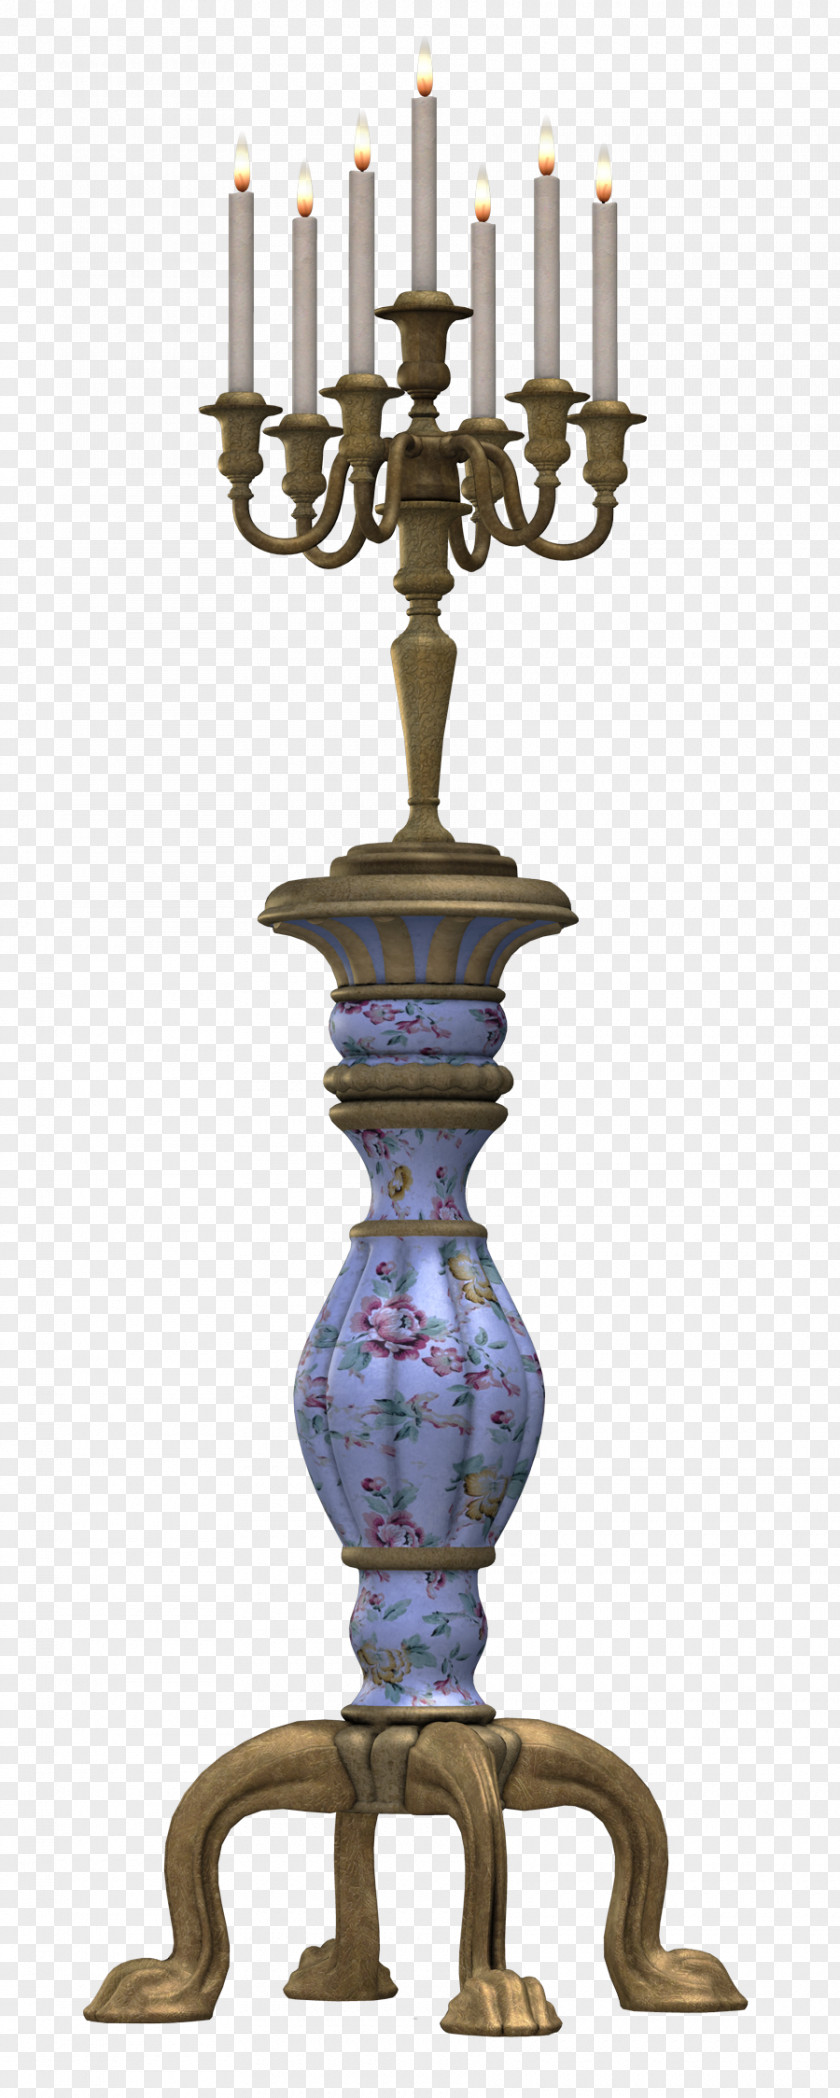 Candlestick PNG